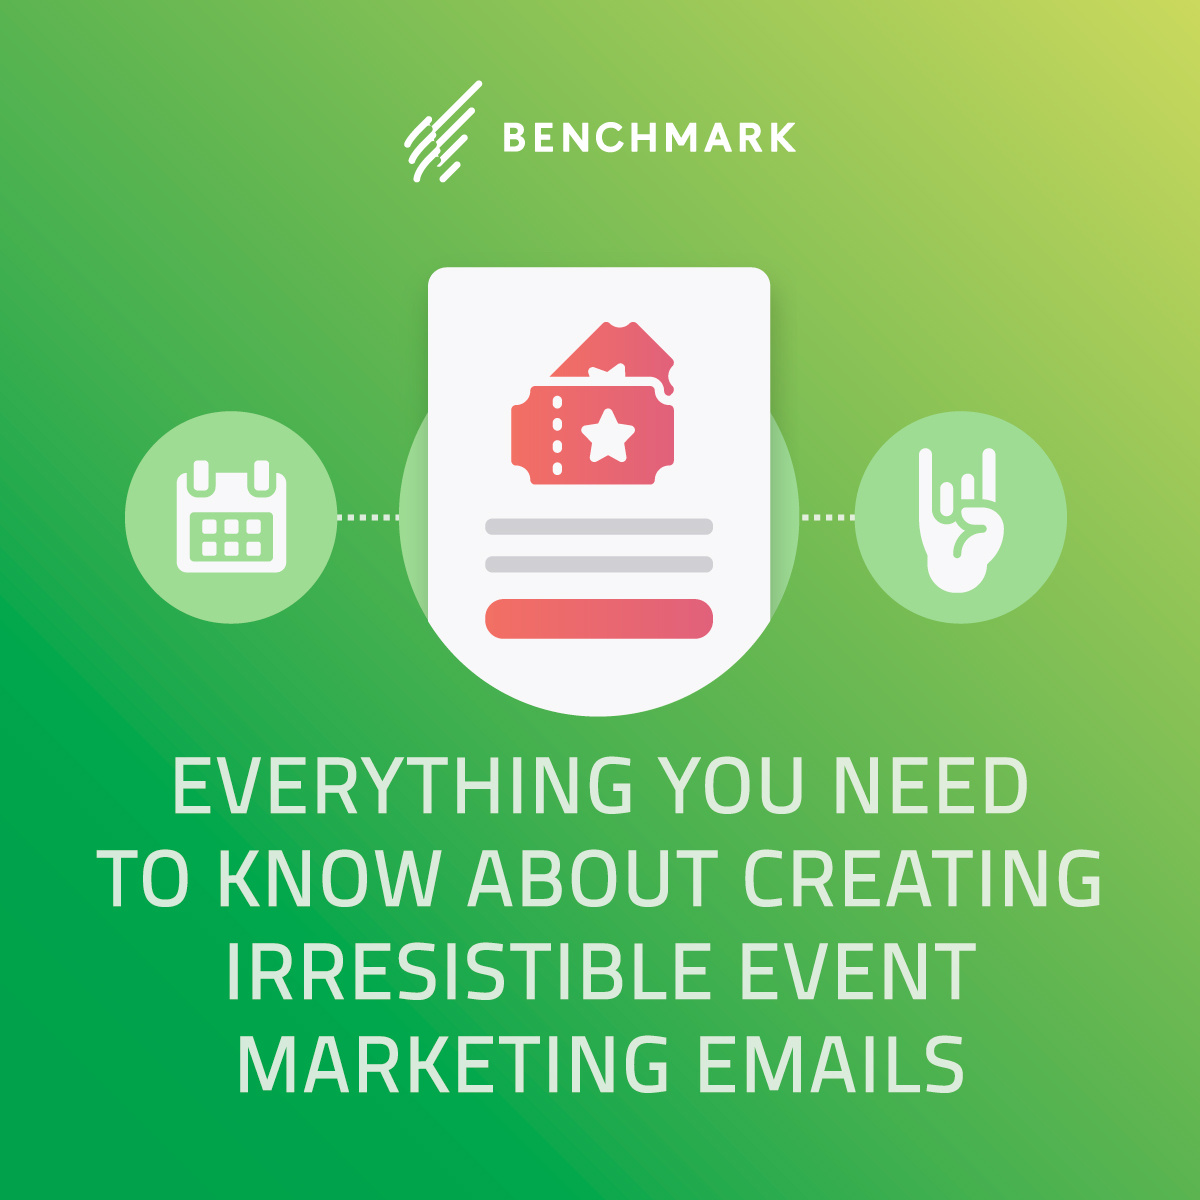 Everything You Need to Know About Creating Irresistible Event Marketing Emails